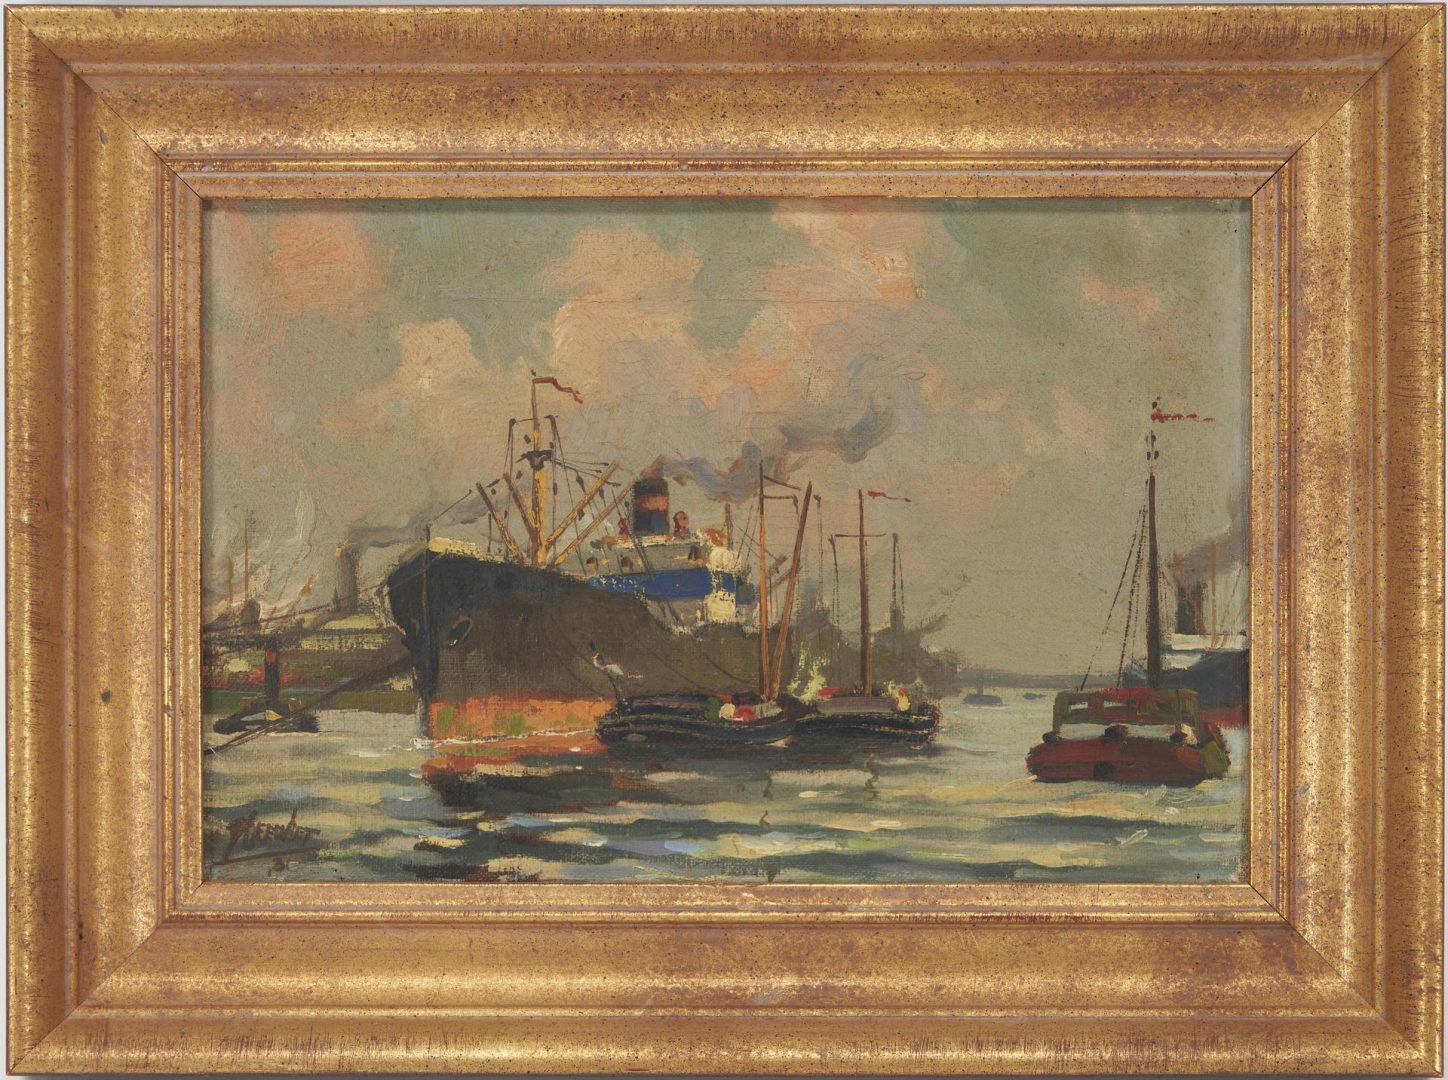 Lot 918: 2 Maritime Works, Inc Reynolds Beal Etching & Small Harbor Scene